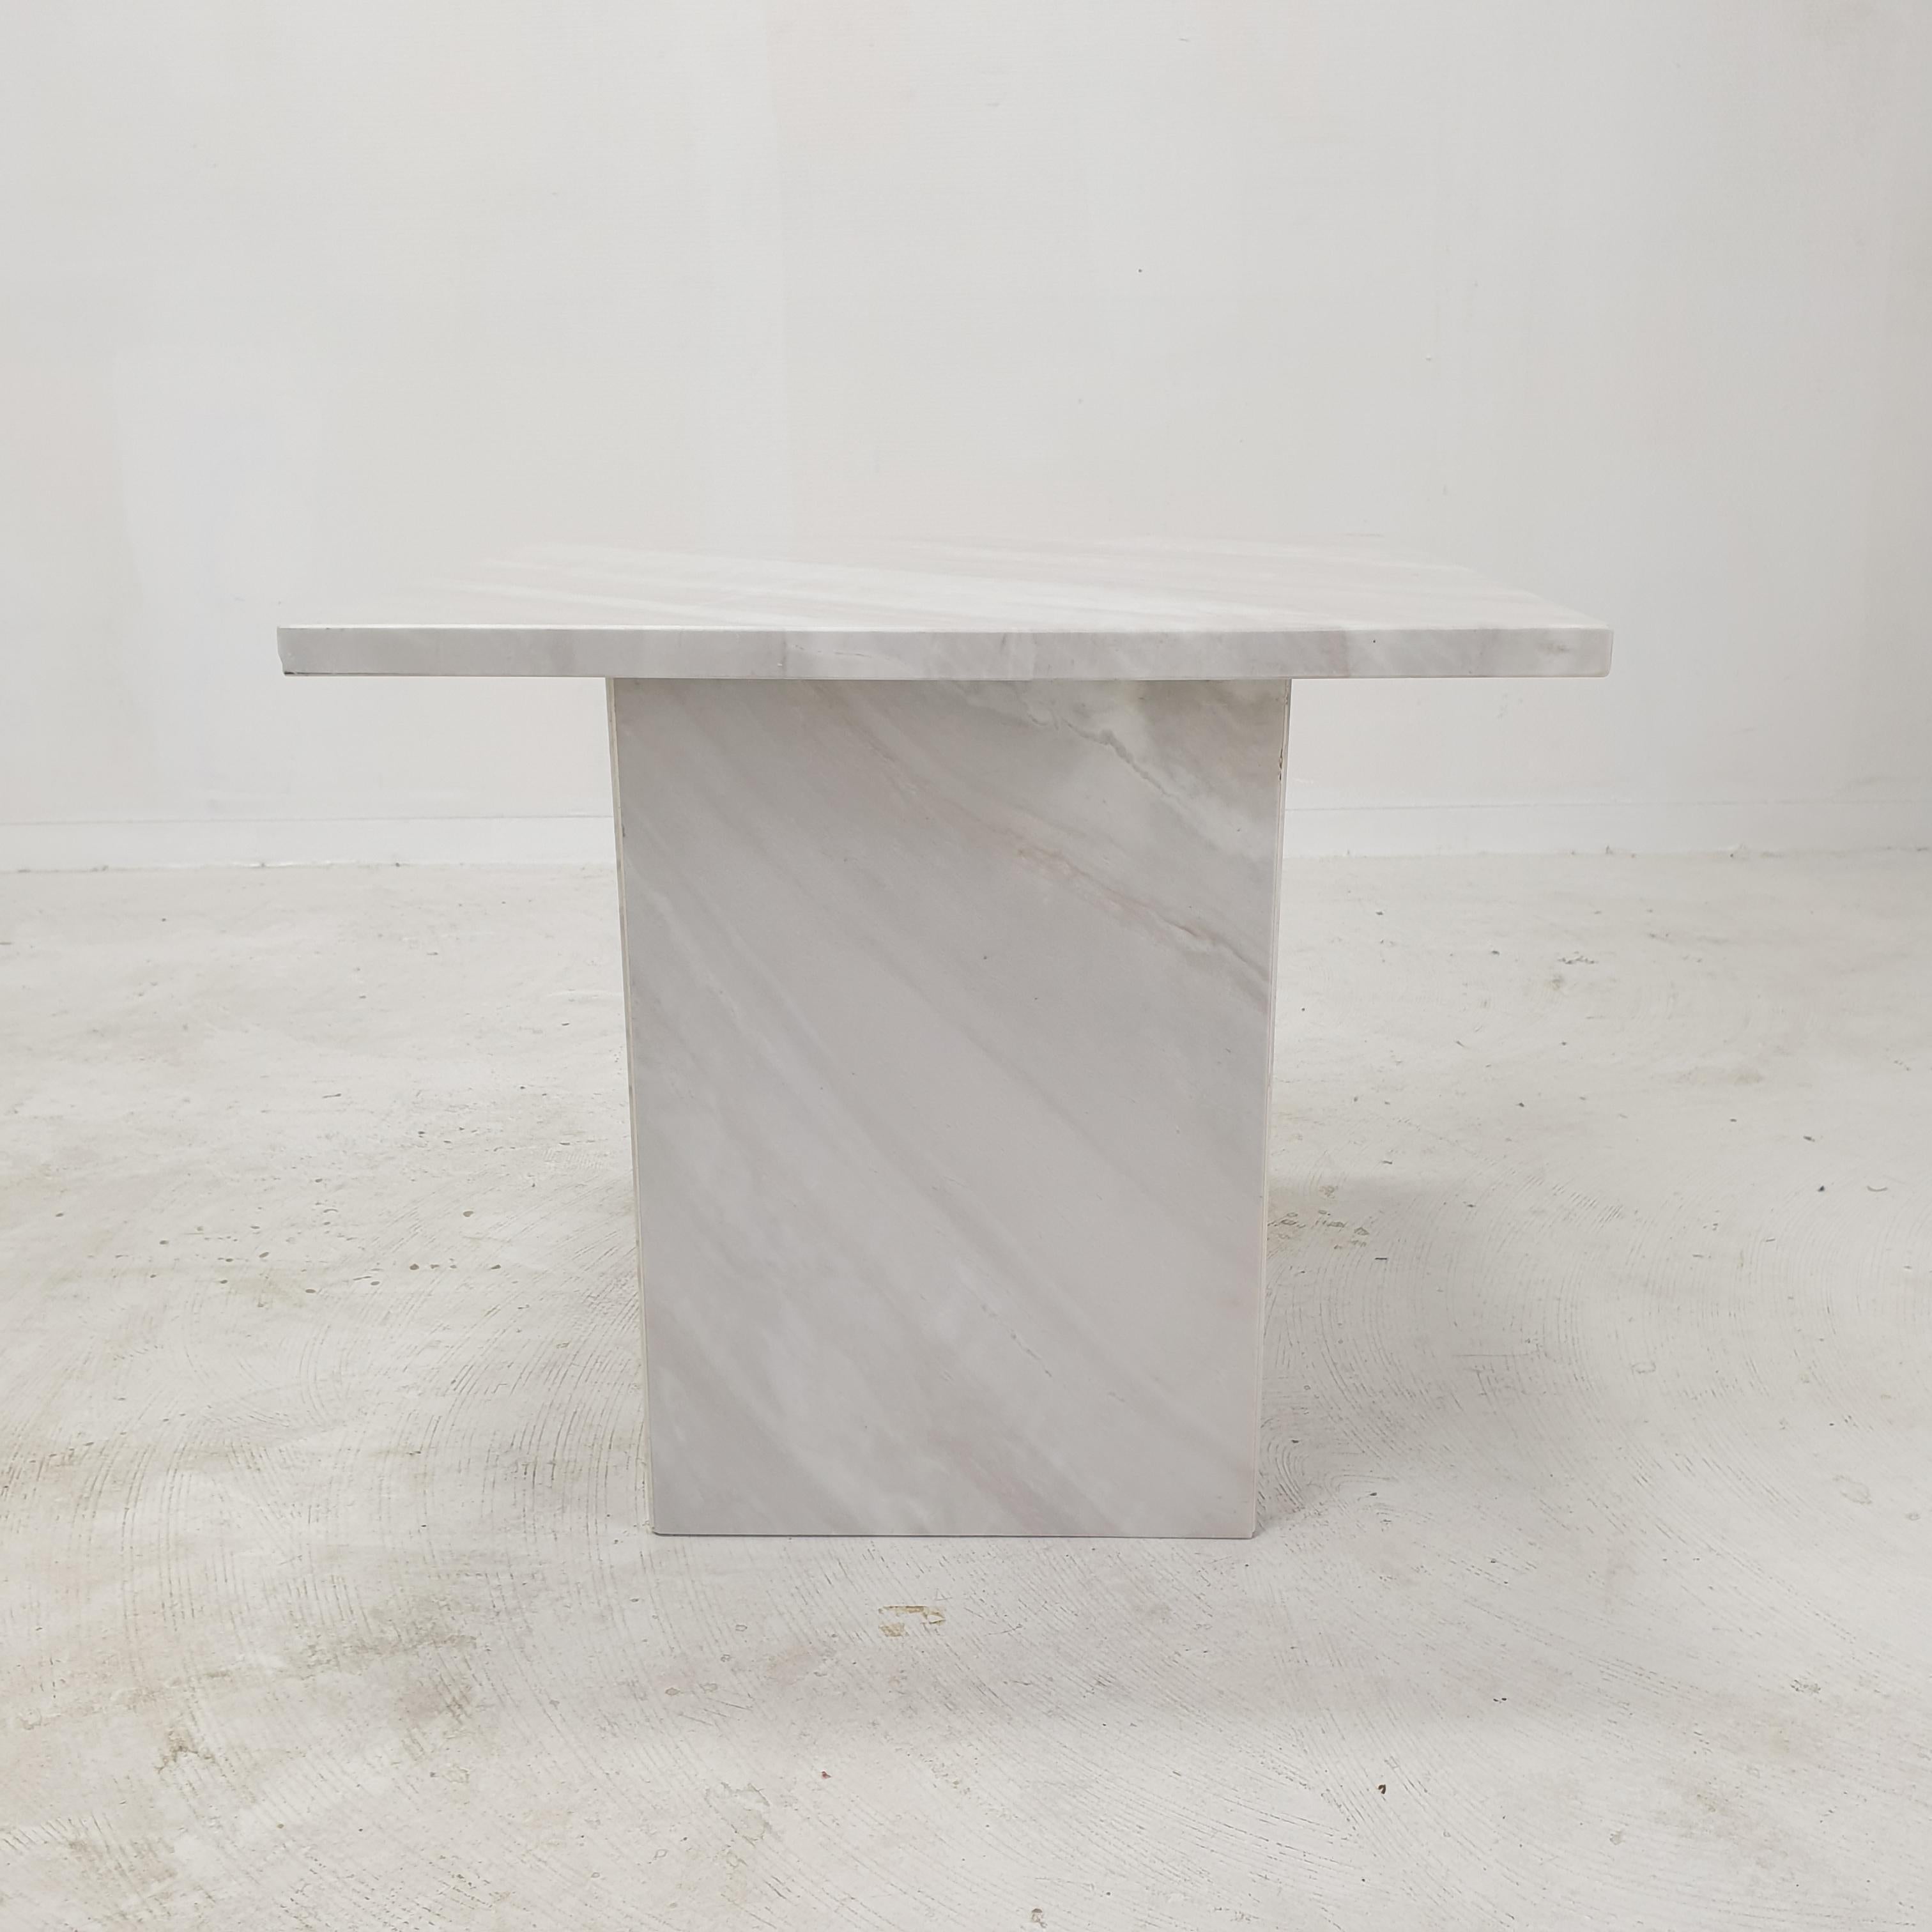 Hand-Crafted Italian Marble Coffee or Side Table, 1980s For Sale